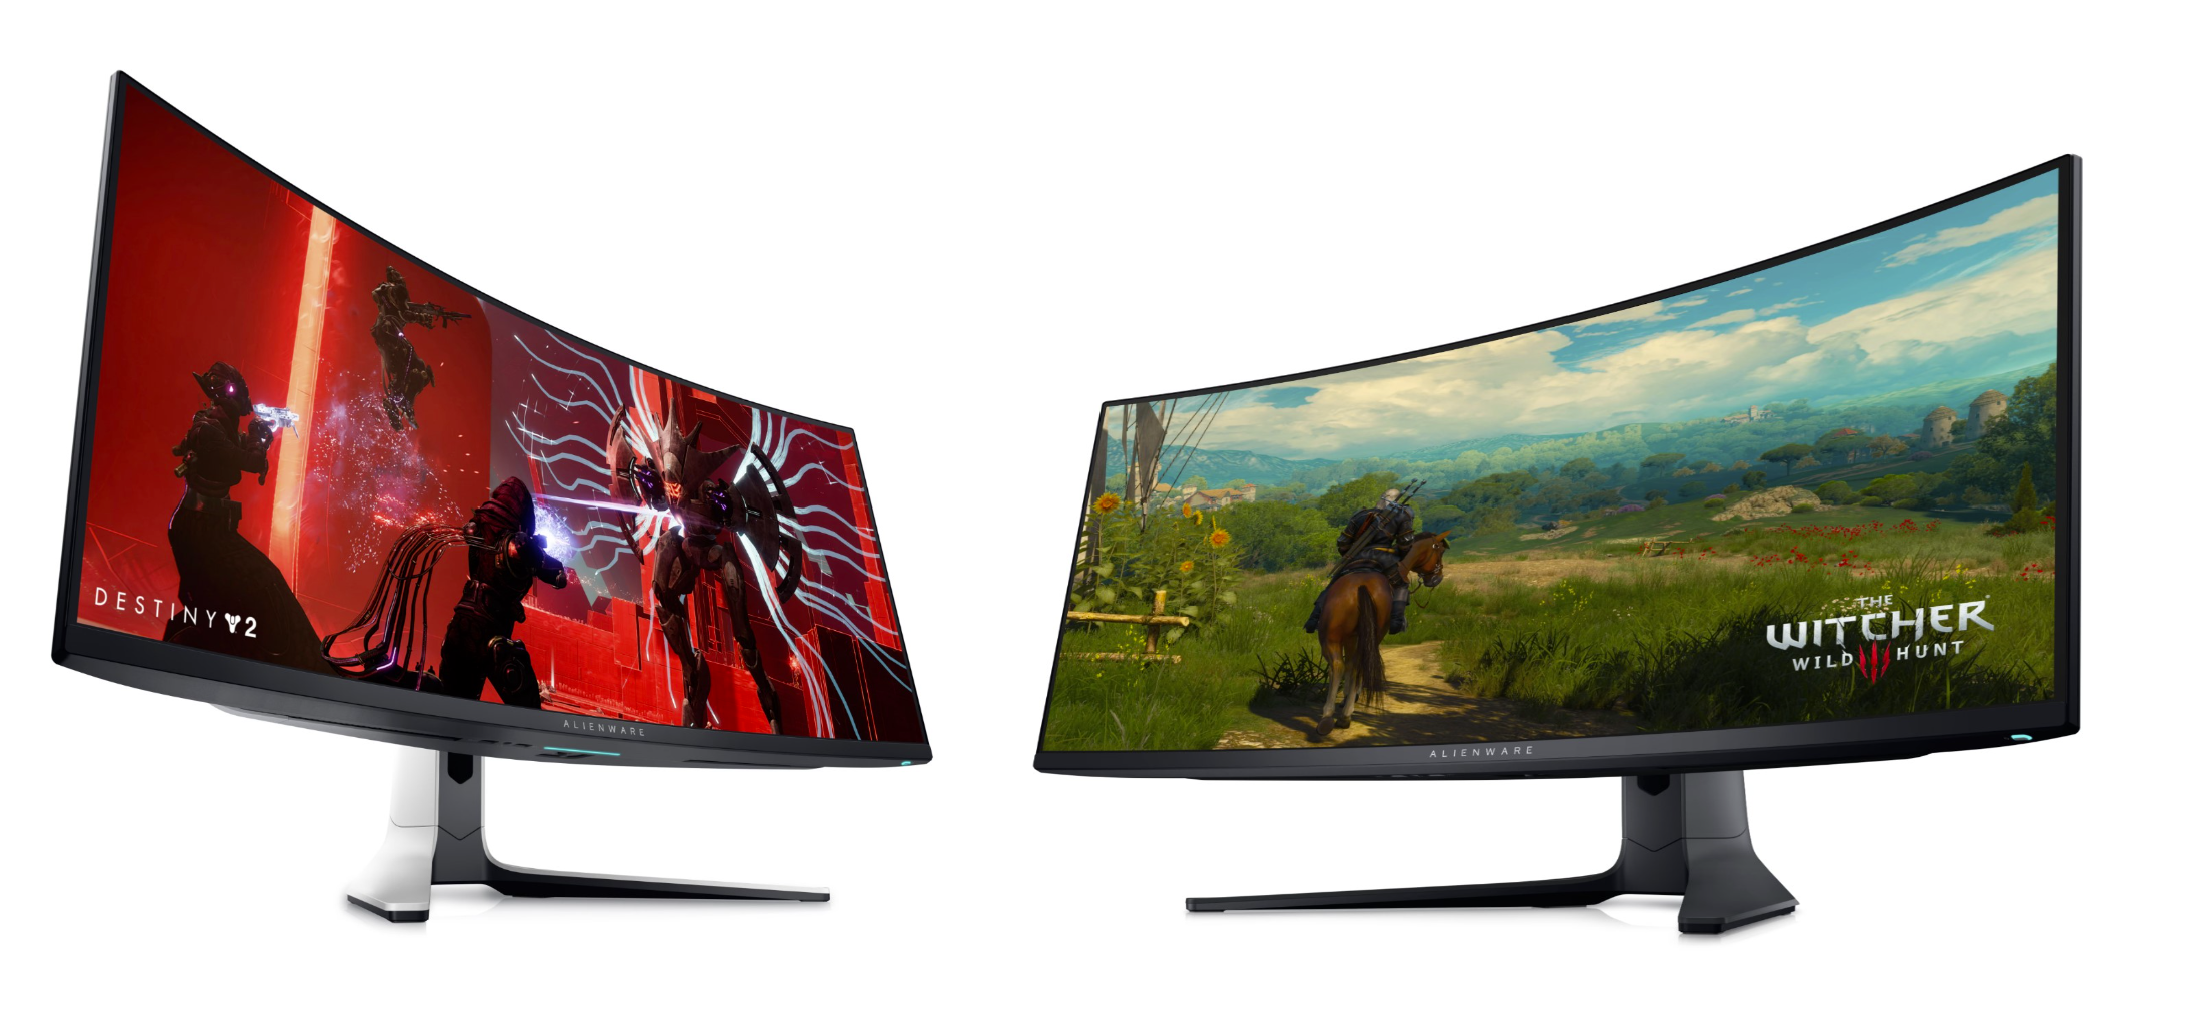 The 34” Alienware AW3423DW and AW3423DWF monitors bring QD-OLED technology  to gaming PCs